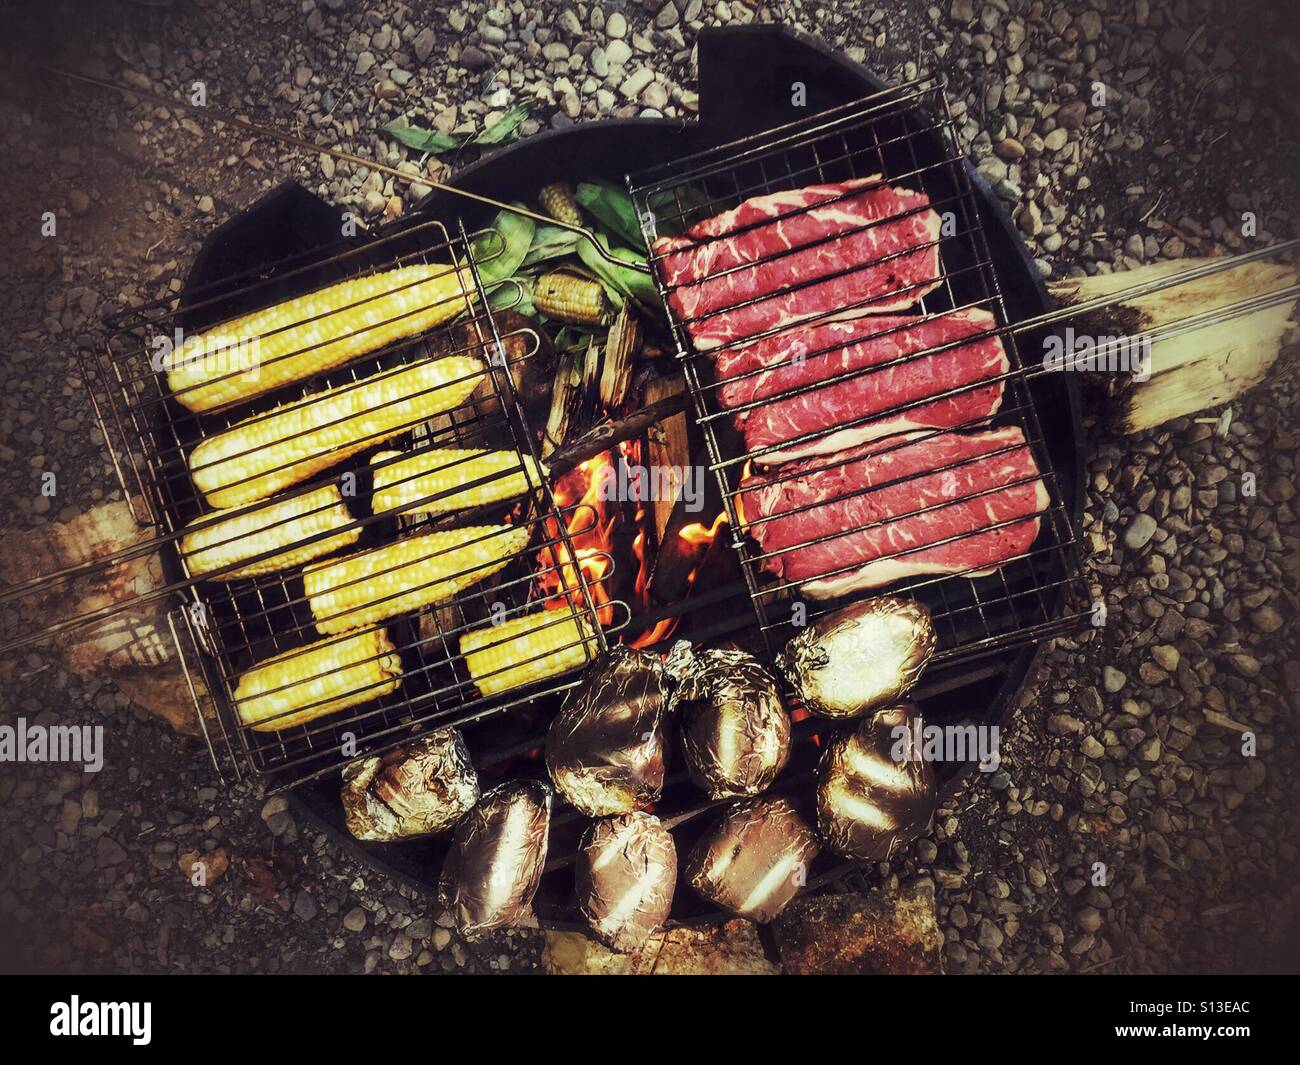 Cooking a large family meal on an open fire. Stock Photo